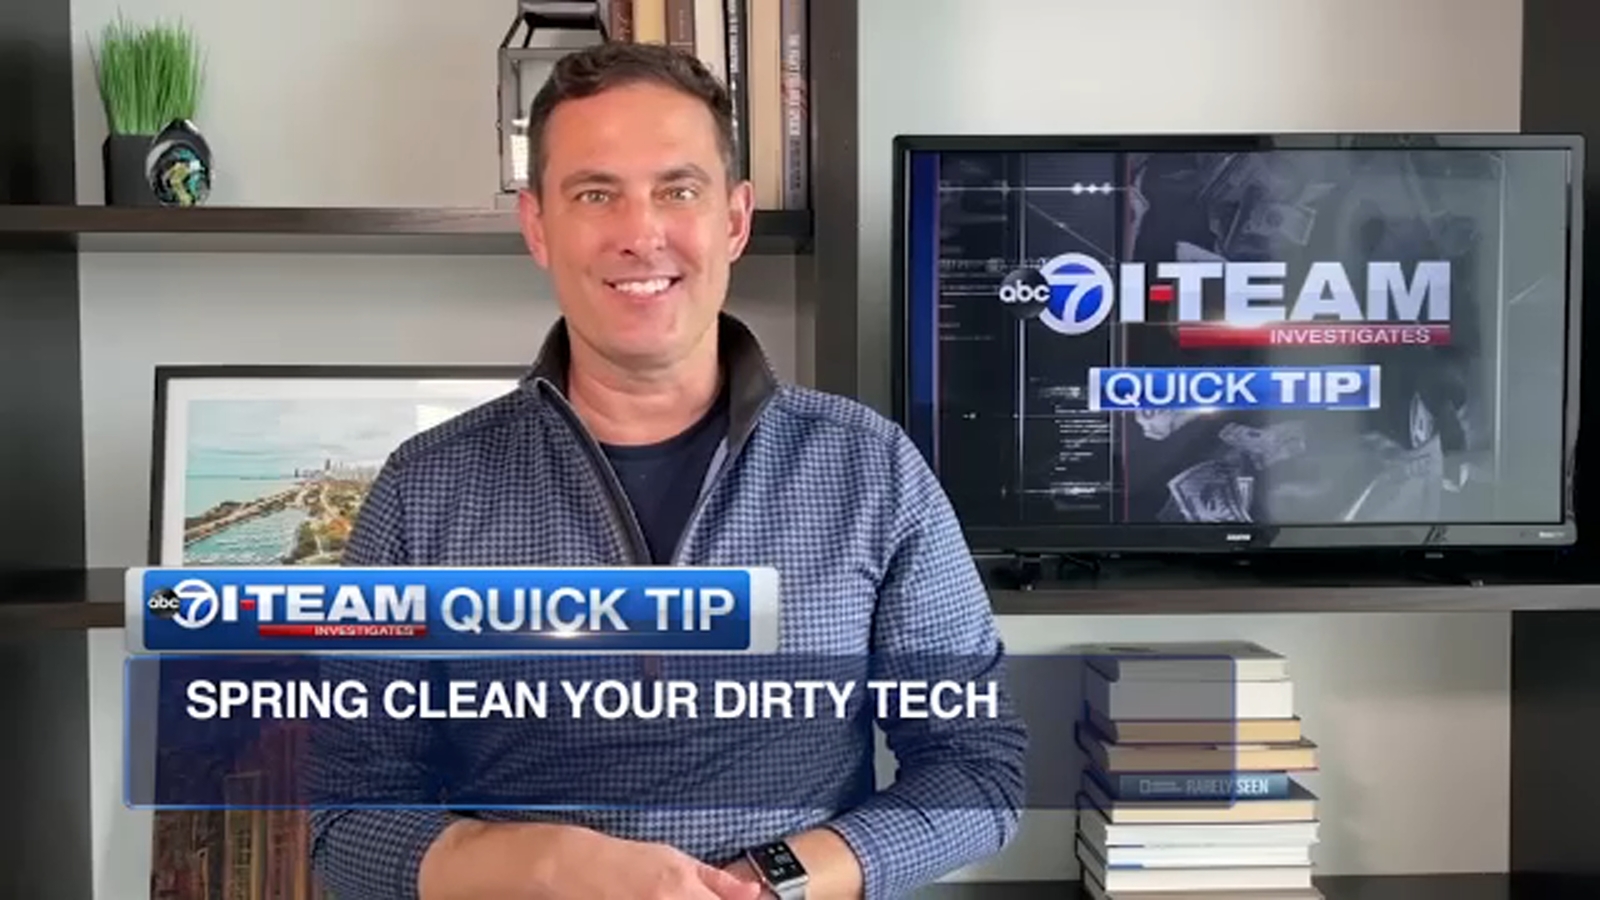 Spring cleaning tips for your personal tech devices